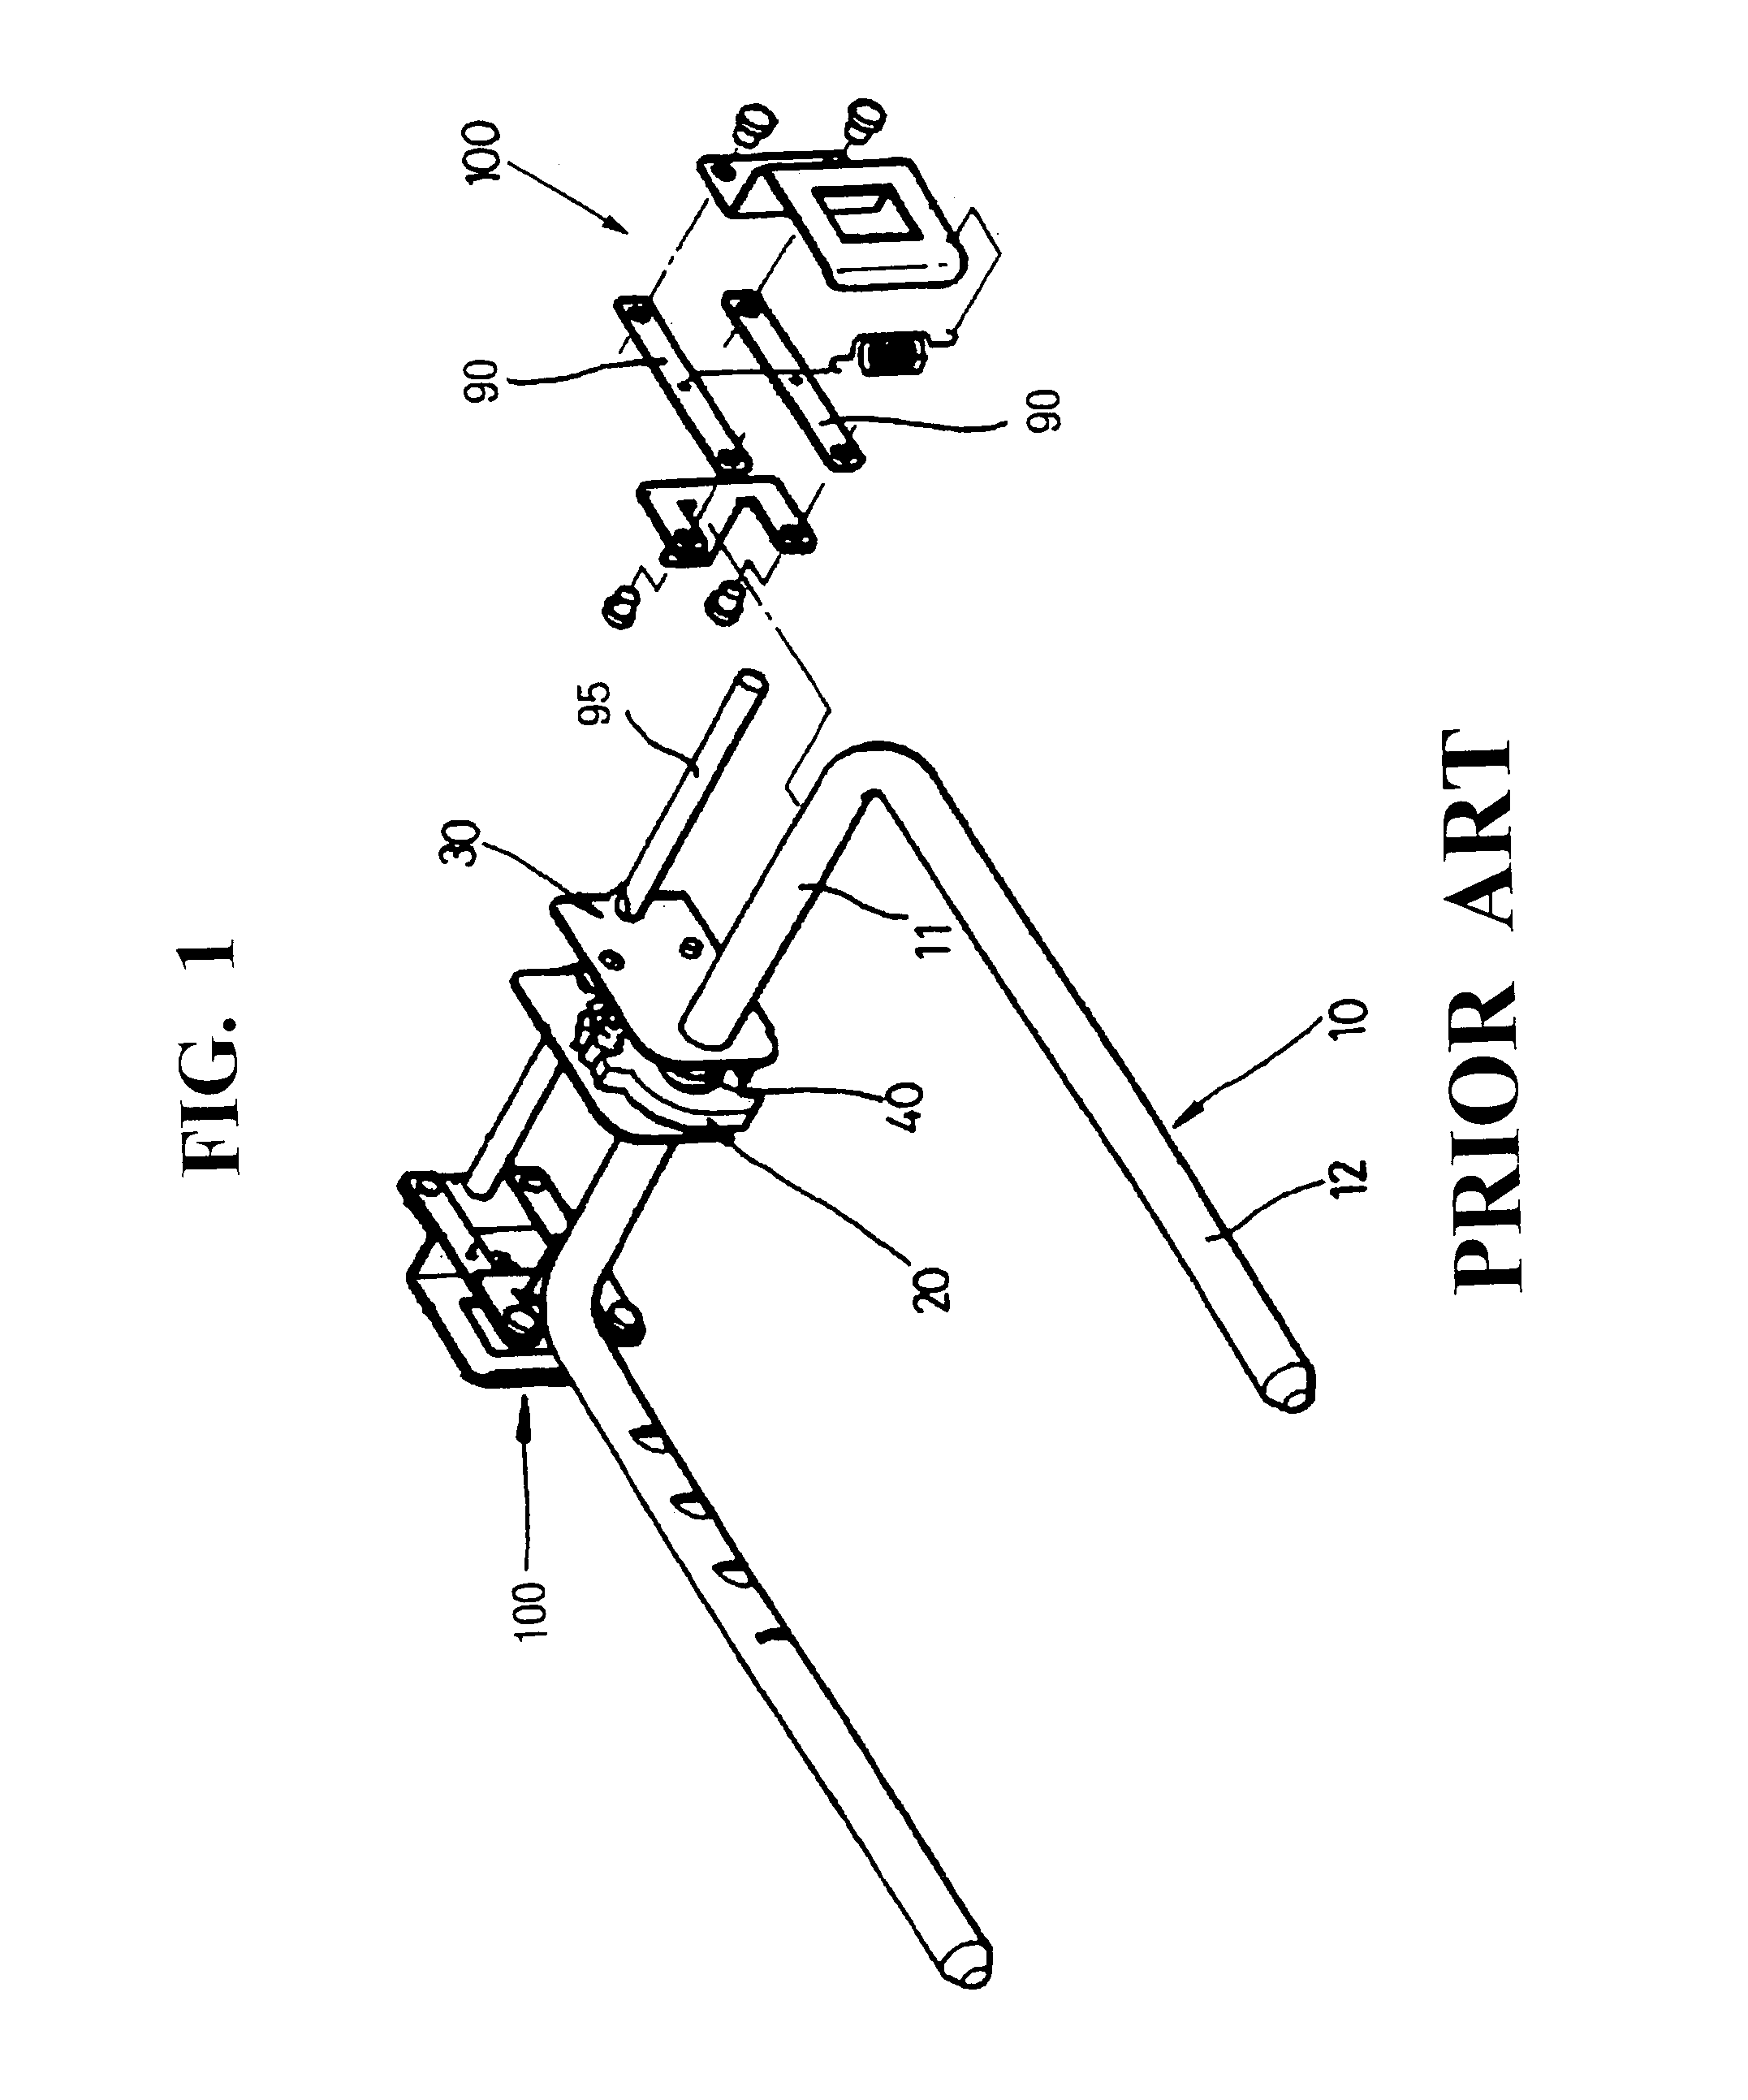 Device for moving headrest back and forth